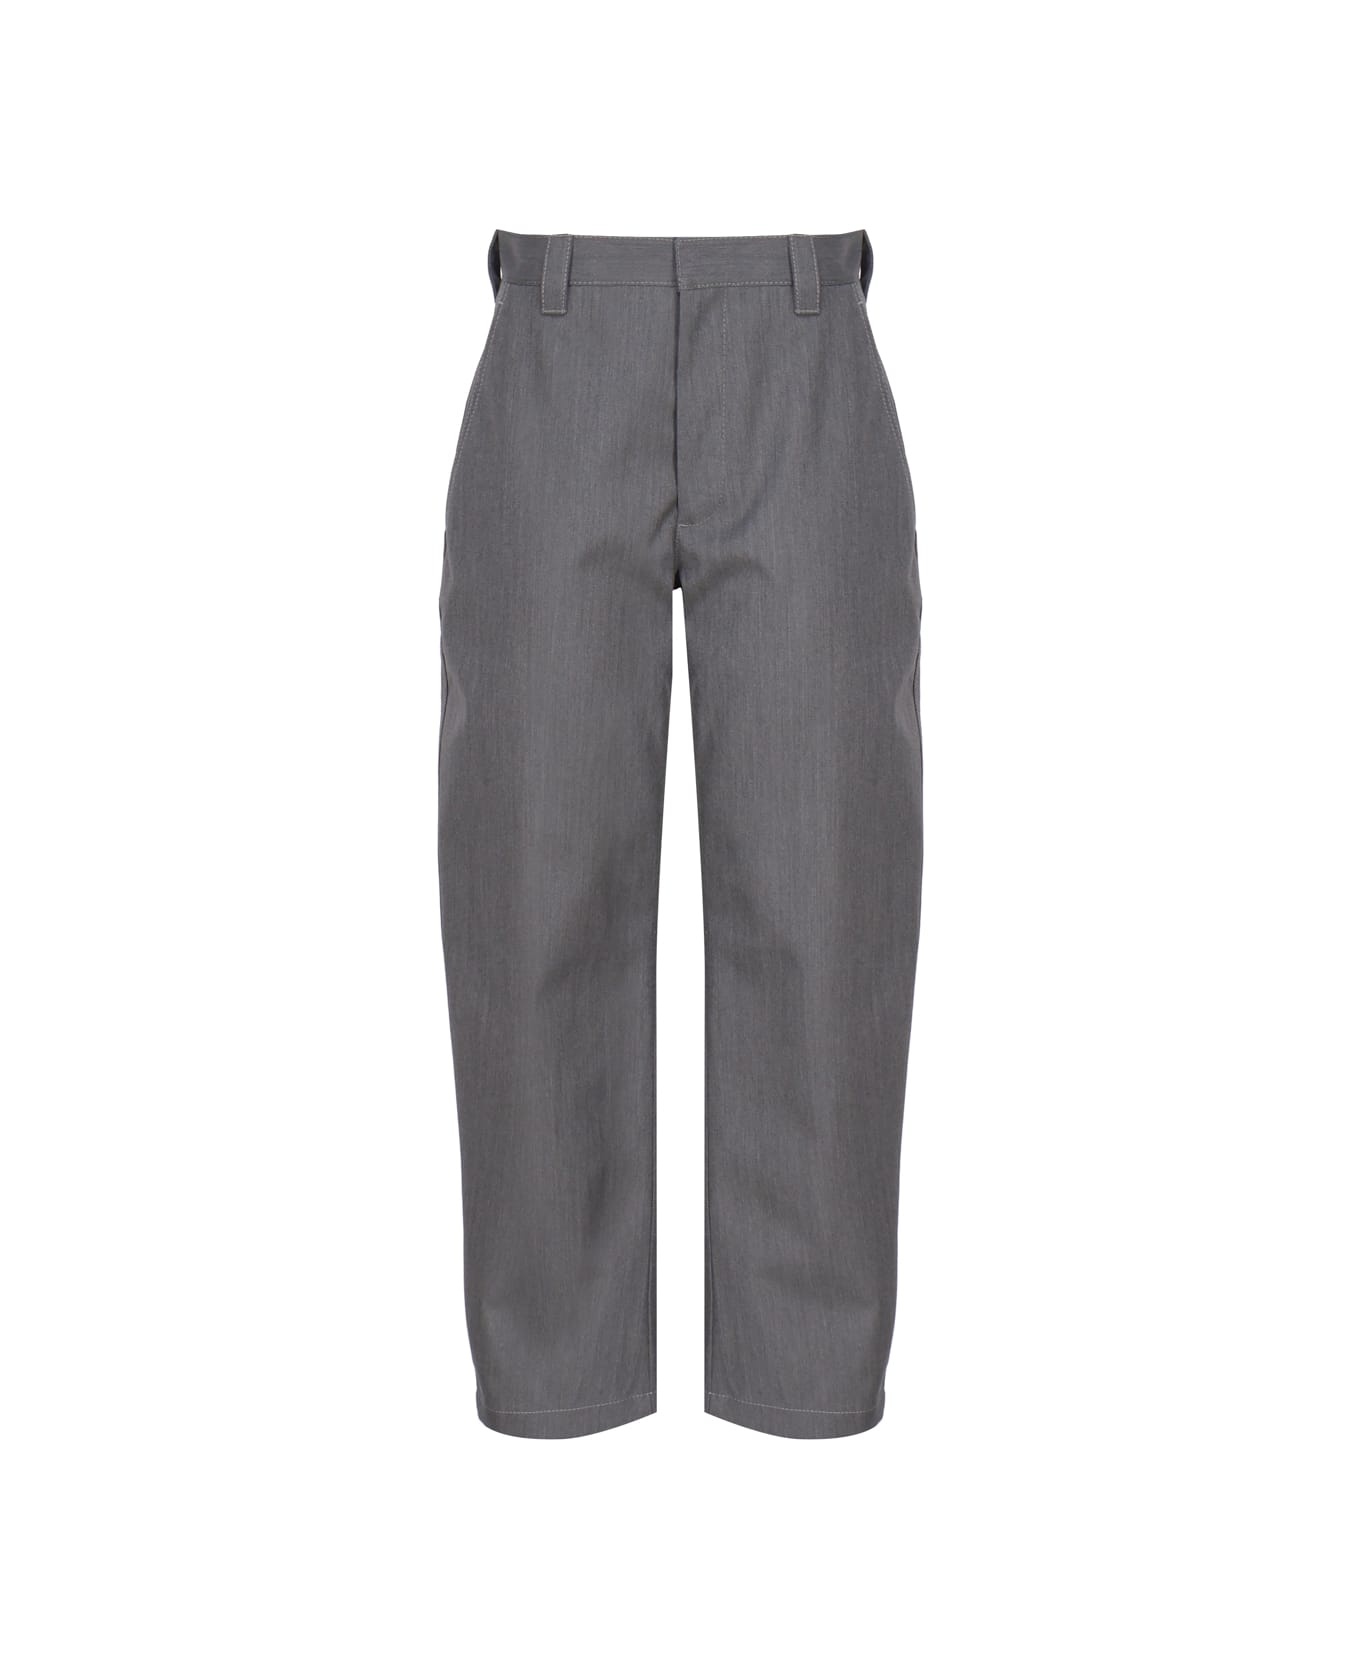 Bottega Veneta Tapered Trousers In Bonded Wool And Cotton - Charcoal/cane sugar